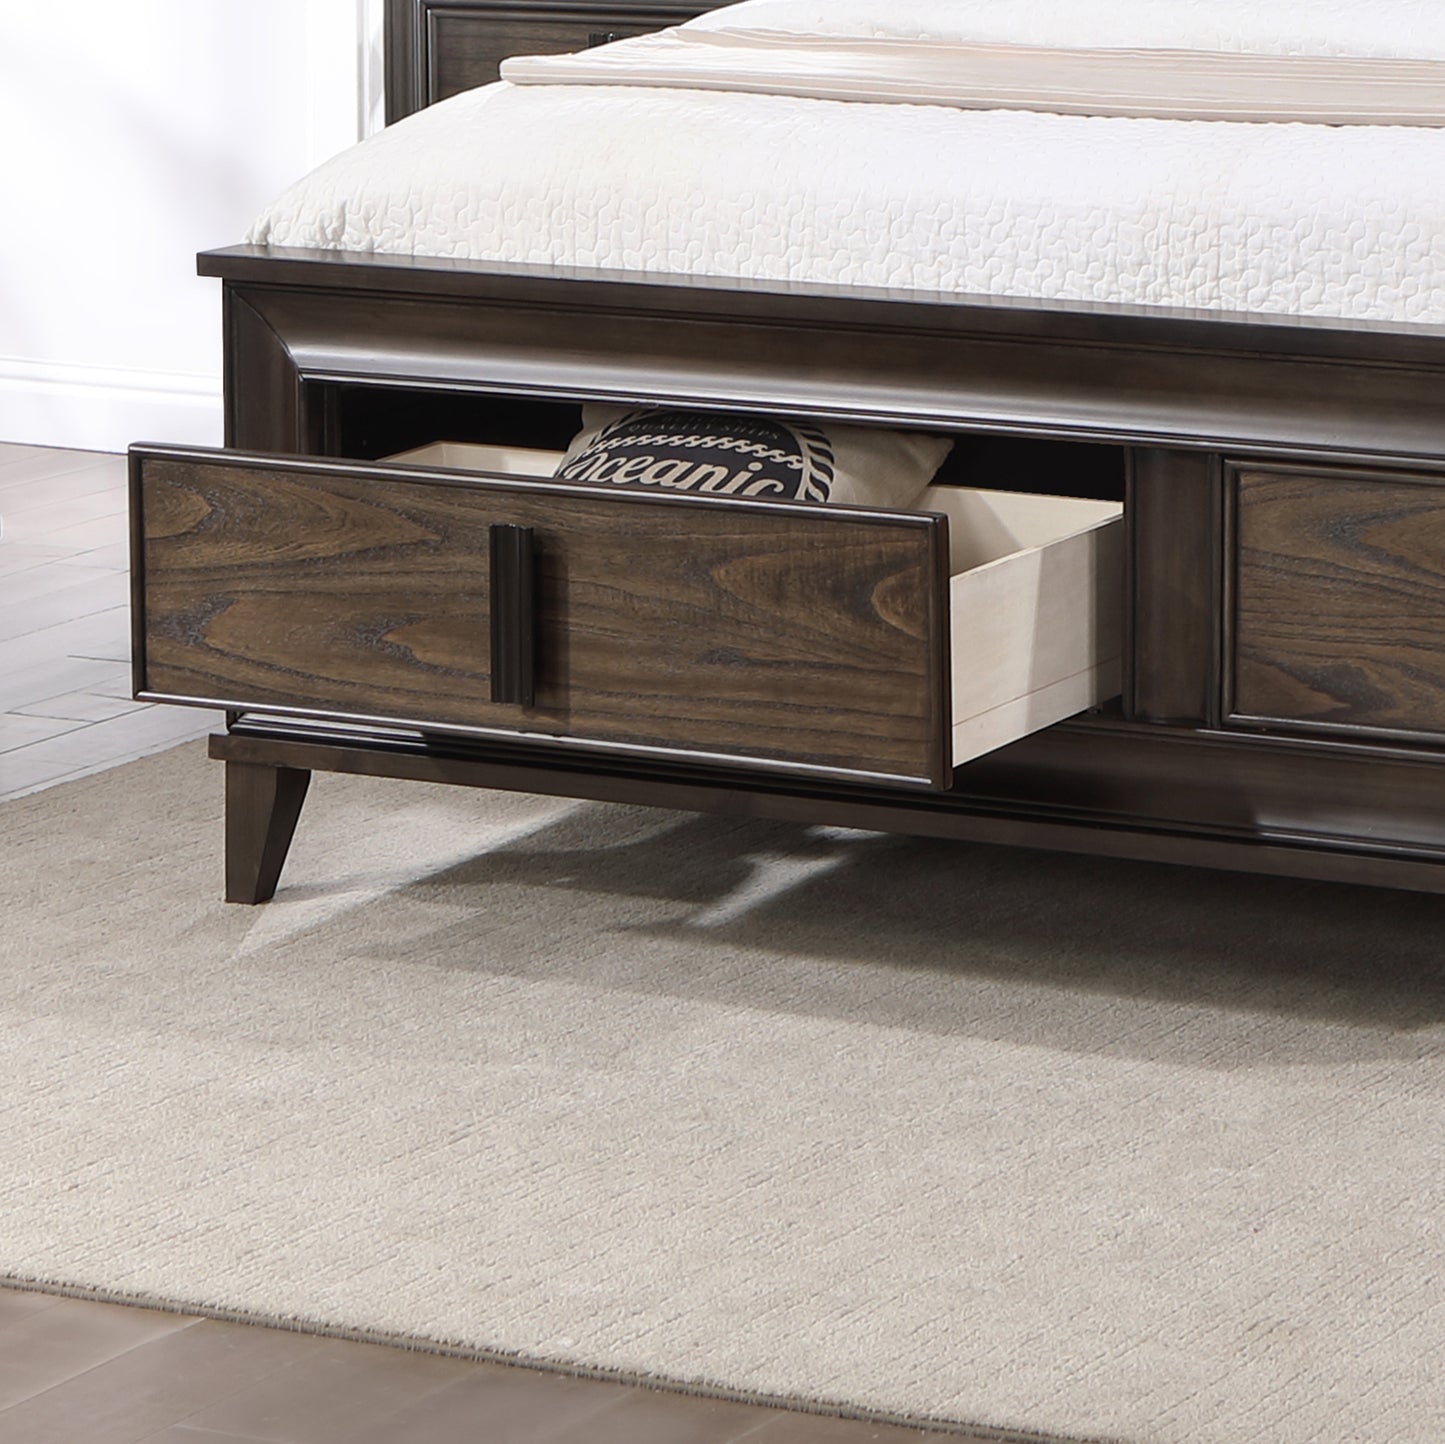 Aetheria Contemporary Wood Upholstered Storage Panel Bed, Dark Brown